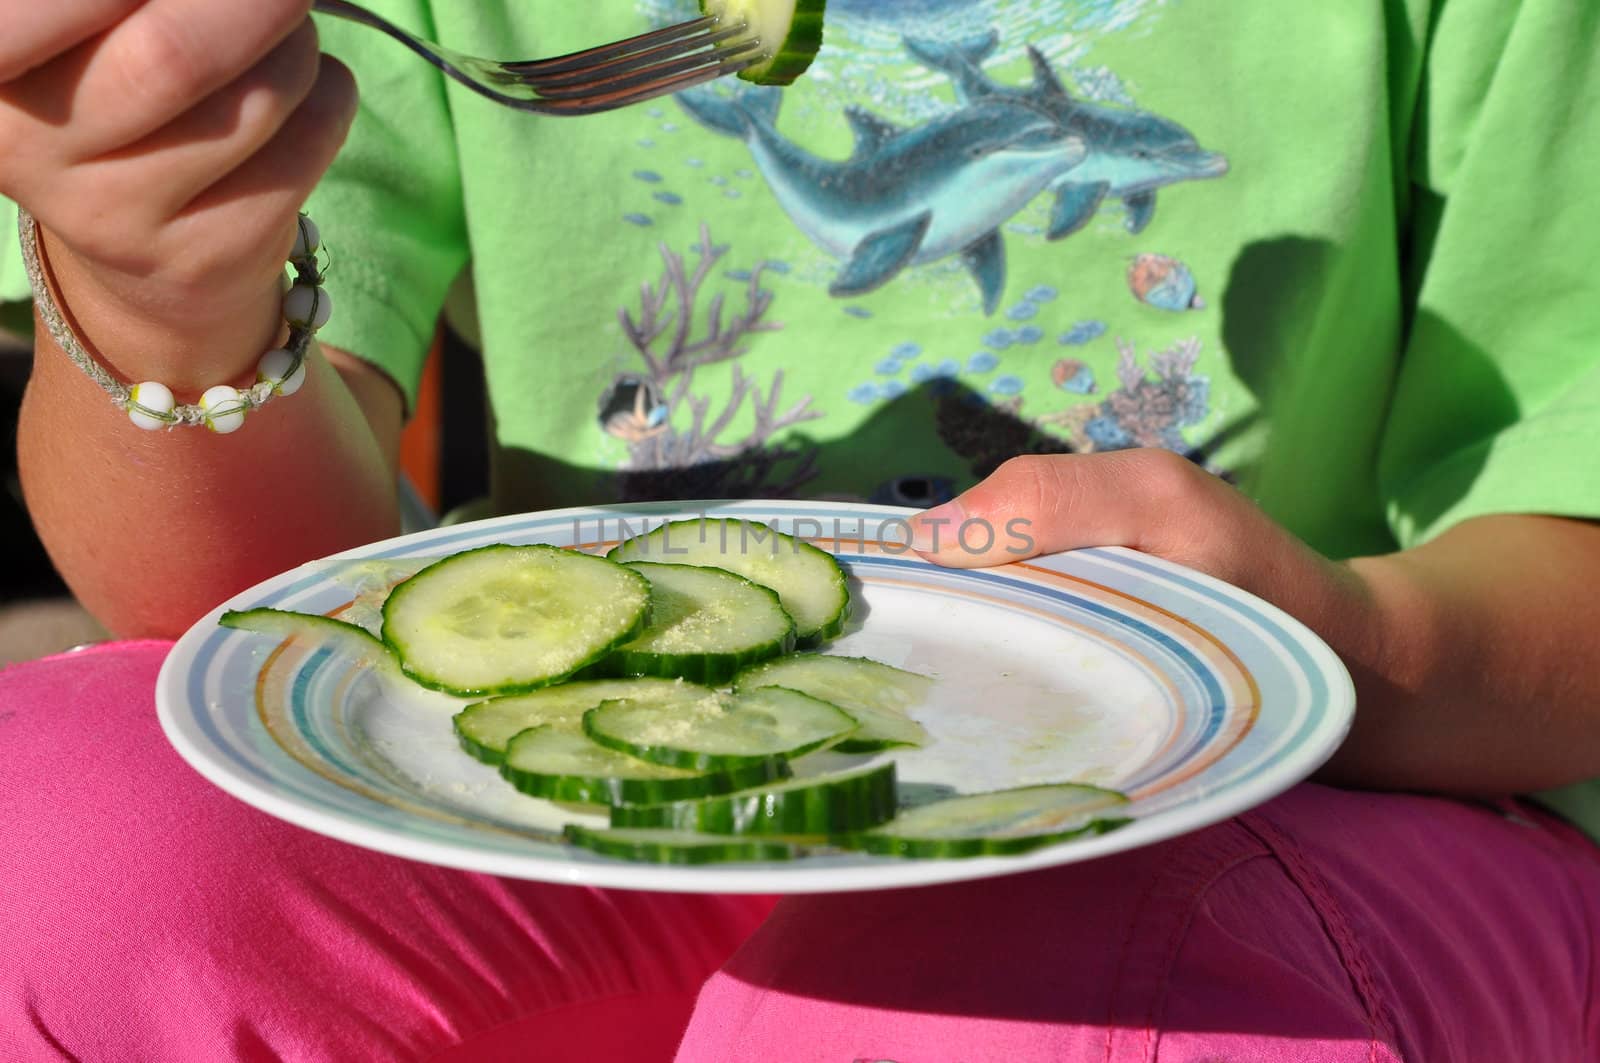 A girl having some cucumber slices.